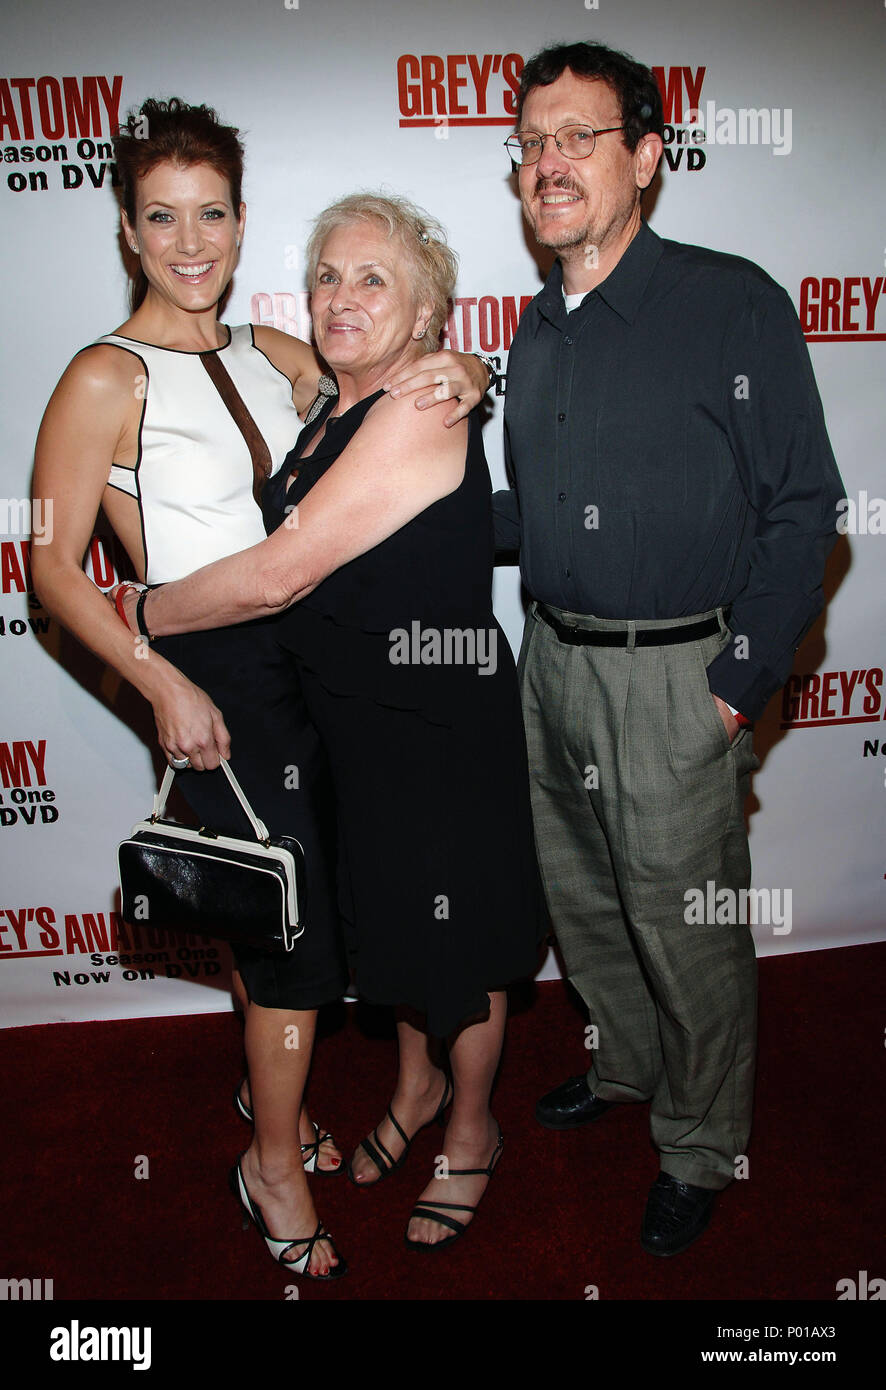 Kate Walsh with mom and dad arriving at the ANATOMY DVD Launch at the Geisha restaurant in Los Angeles. February 13, mom dad010 Event in Hollywood Life - California, Red